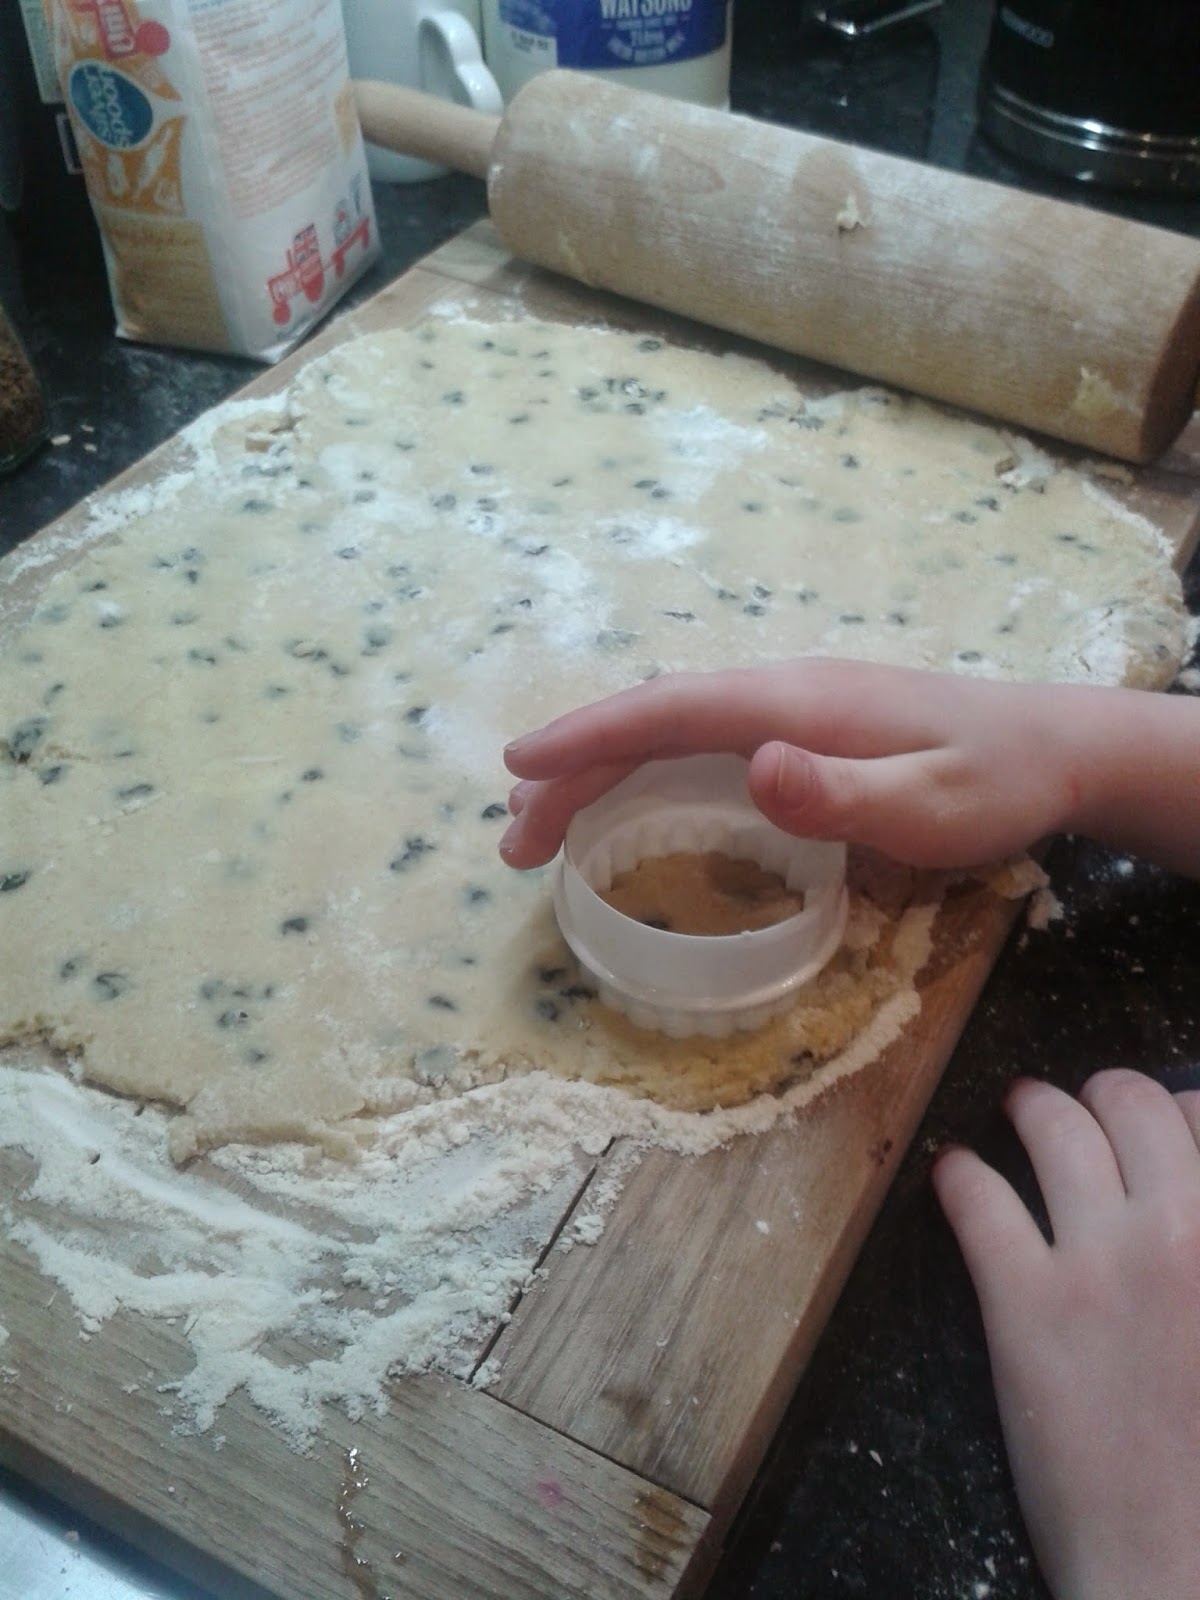 Welsh cakes recipe - Caitlin using a cutter to cut out the Welsh cakes from the dough